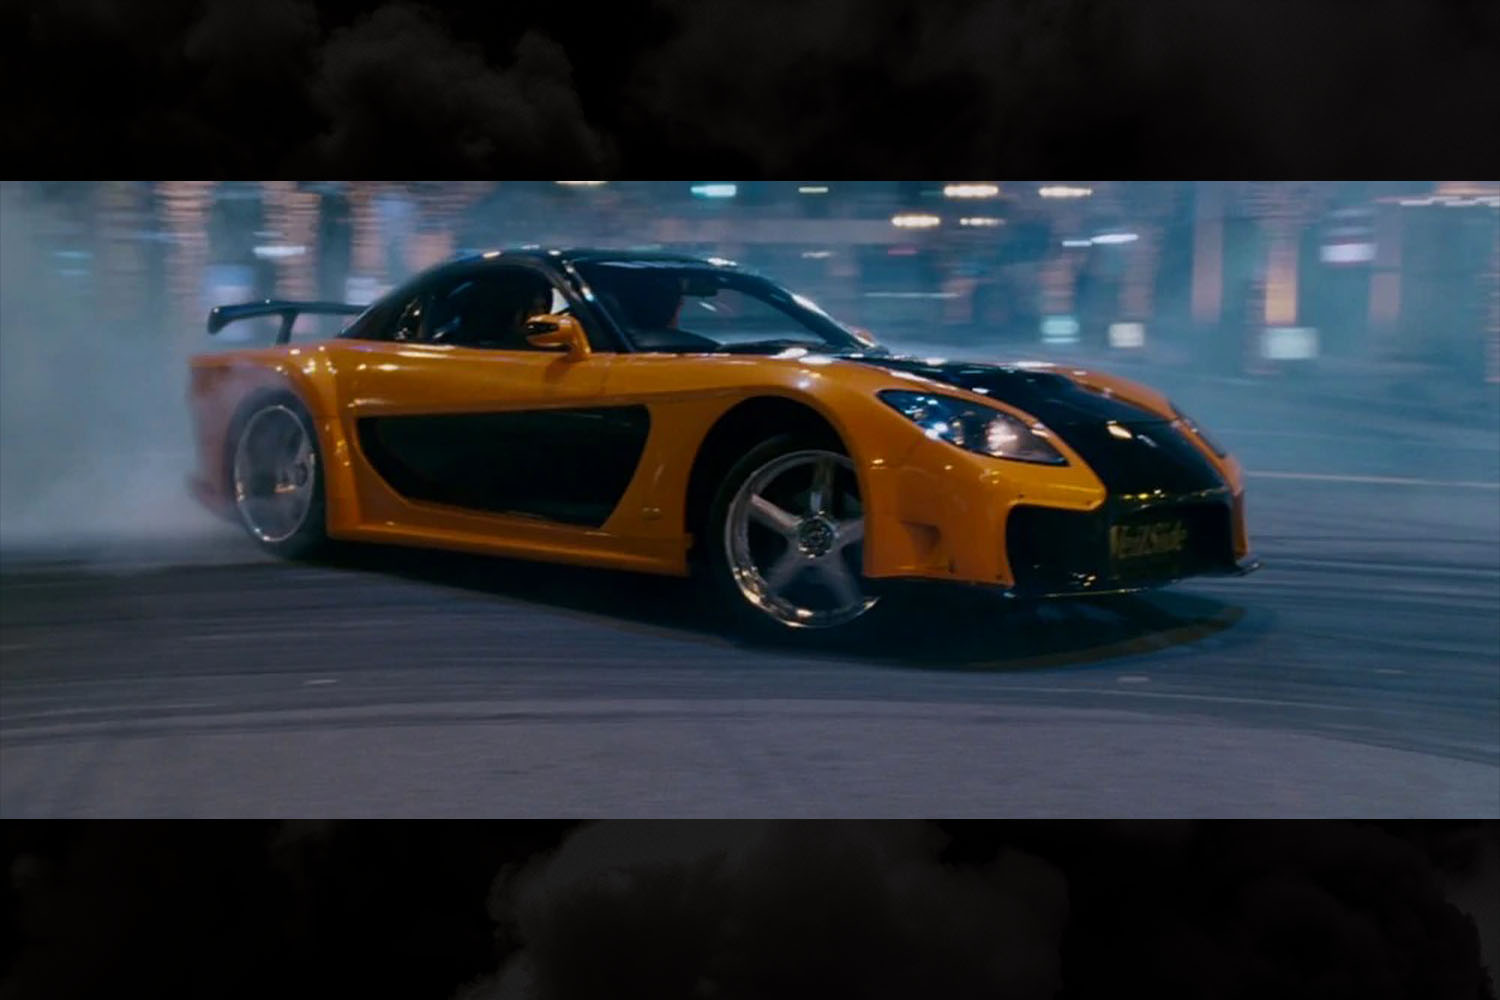 The orange and black 1997 Mazda RX-7 Veilside driven by Han in The Fast and the Furious: Tokyo Drift